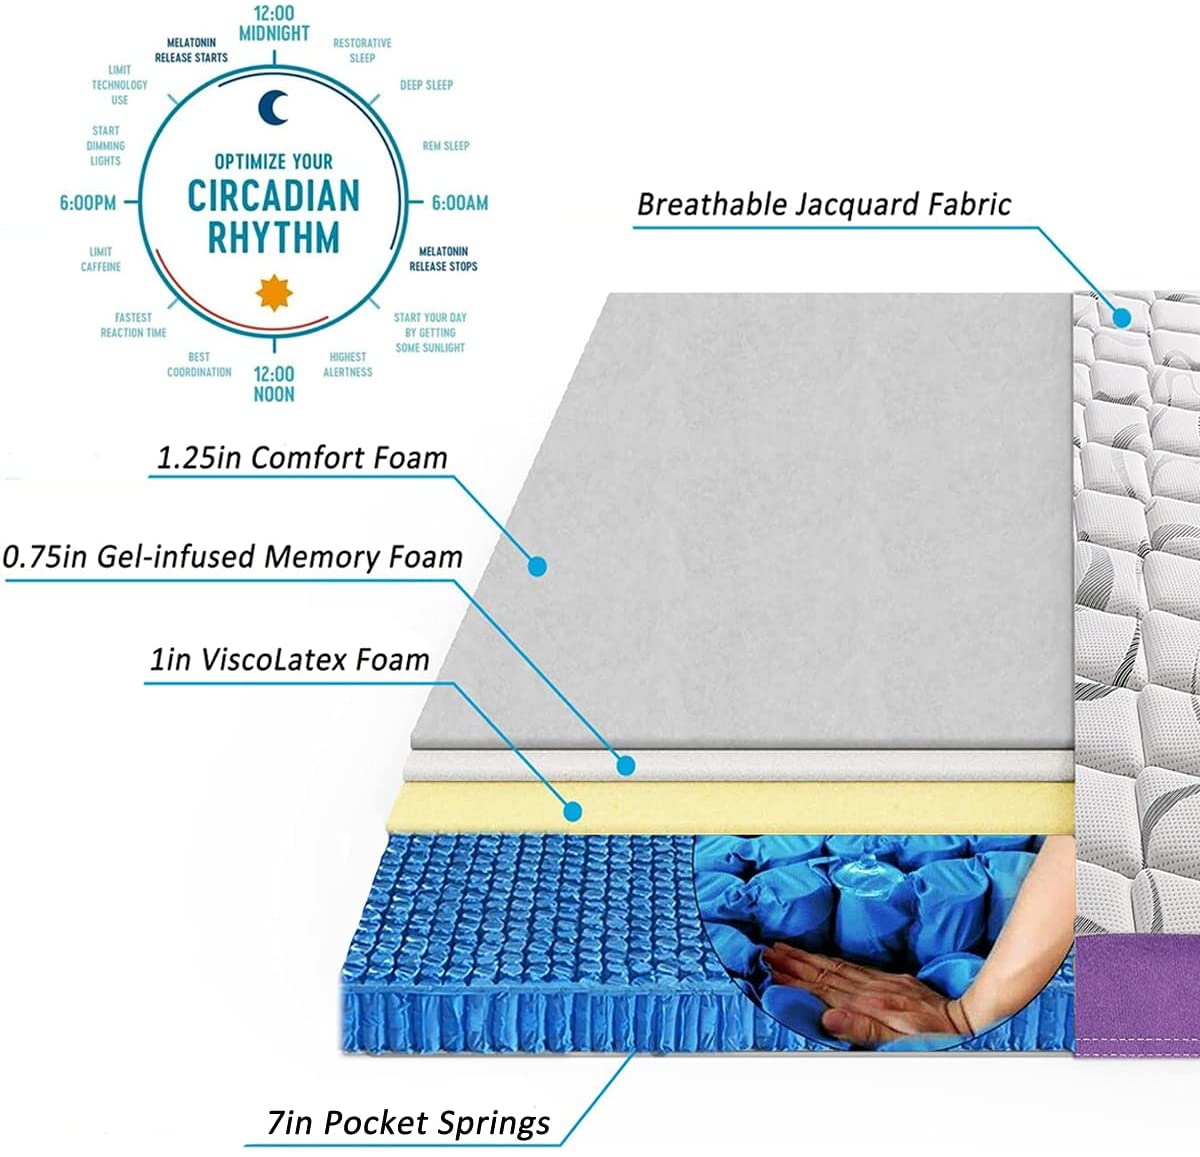 Sleeping on an orthopedic mattress like this one reduces the likelihood of developing aches and pains.